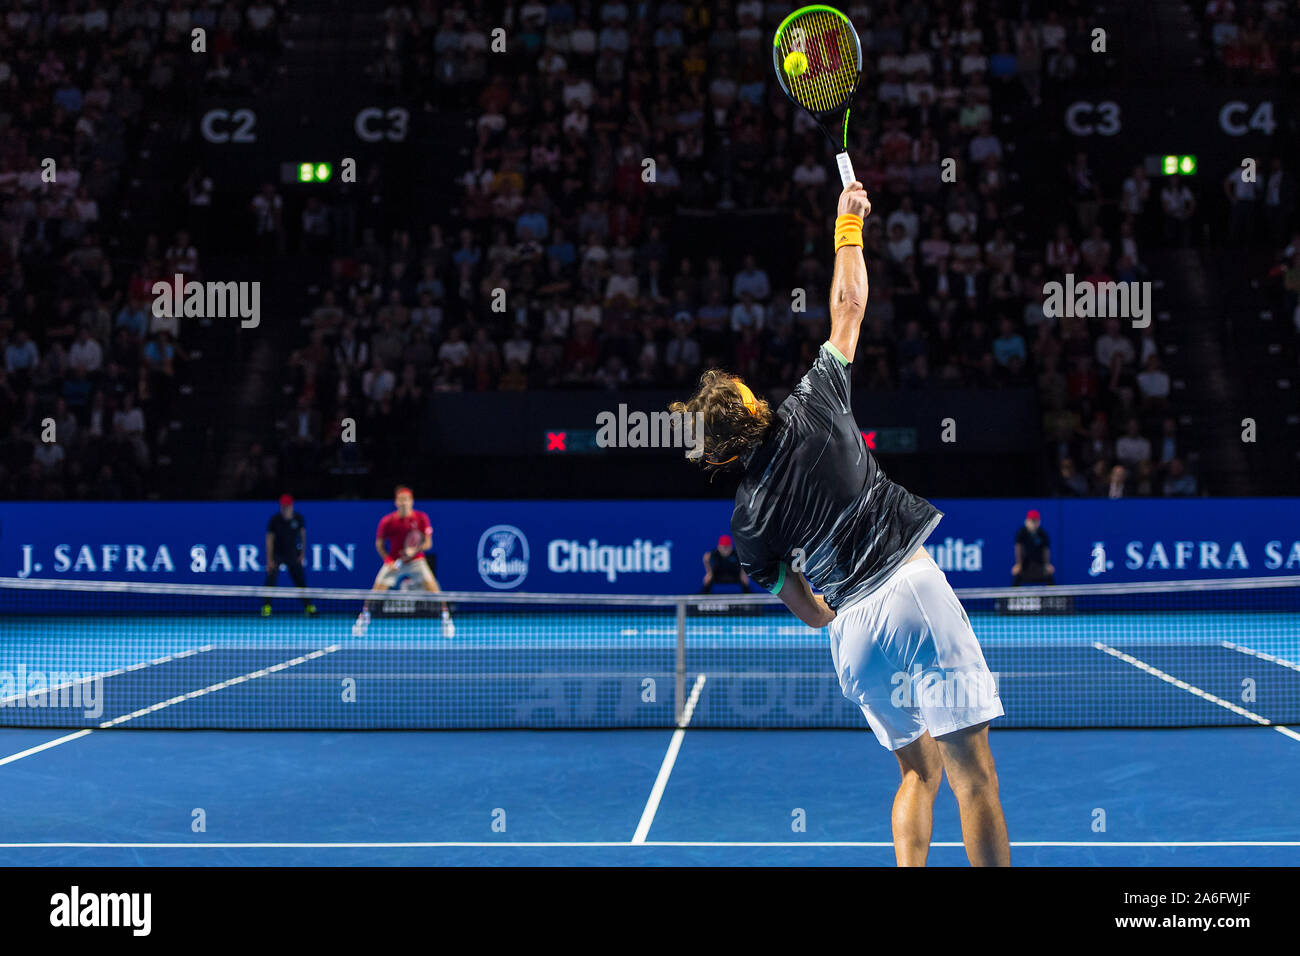 St. Jakobshalle, Basel, Switzerland. 26th Oct, 2019. ATP World Tour Tennis,  Swiss Indoors; Stefanos Tsitsipas (GRE) serves the ball in the match  against Roger Federer (SUI) - Editorial Use Credit: Action Plus